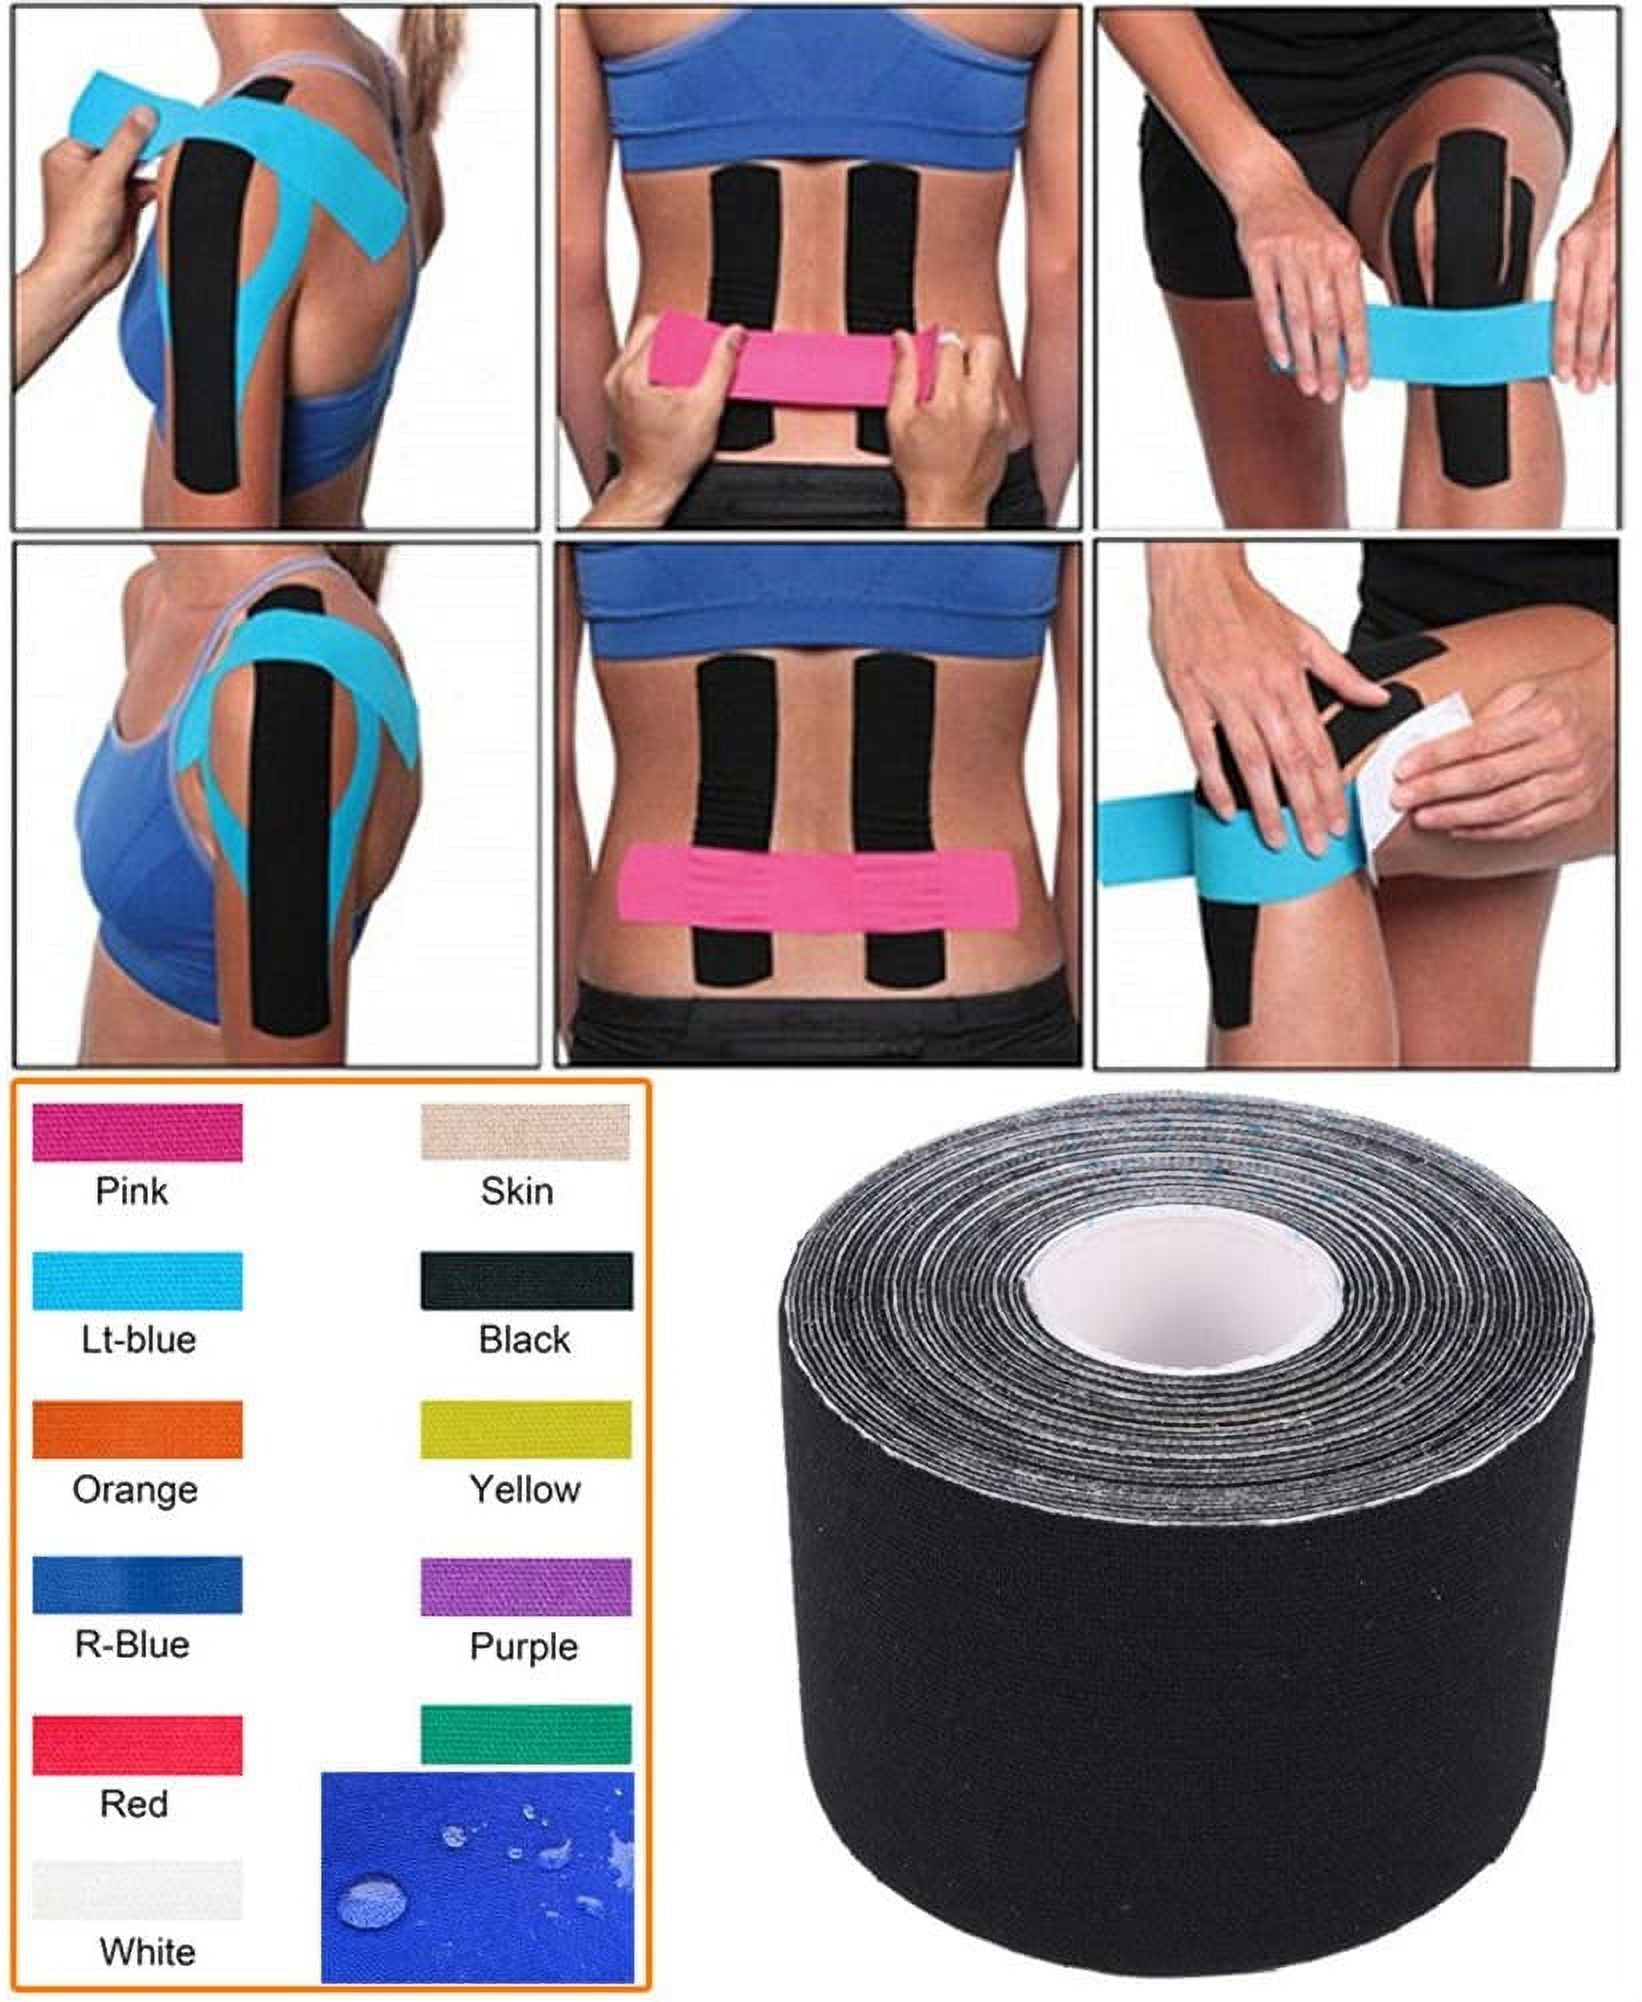 Visland Kinesiology Tape, Waterproof Adhesive Sport Tape for Pain Relief,  Cotton Elastic Athlete Tape for Exercise Fitness Muscle & Joints Support